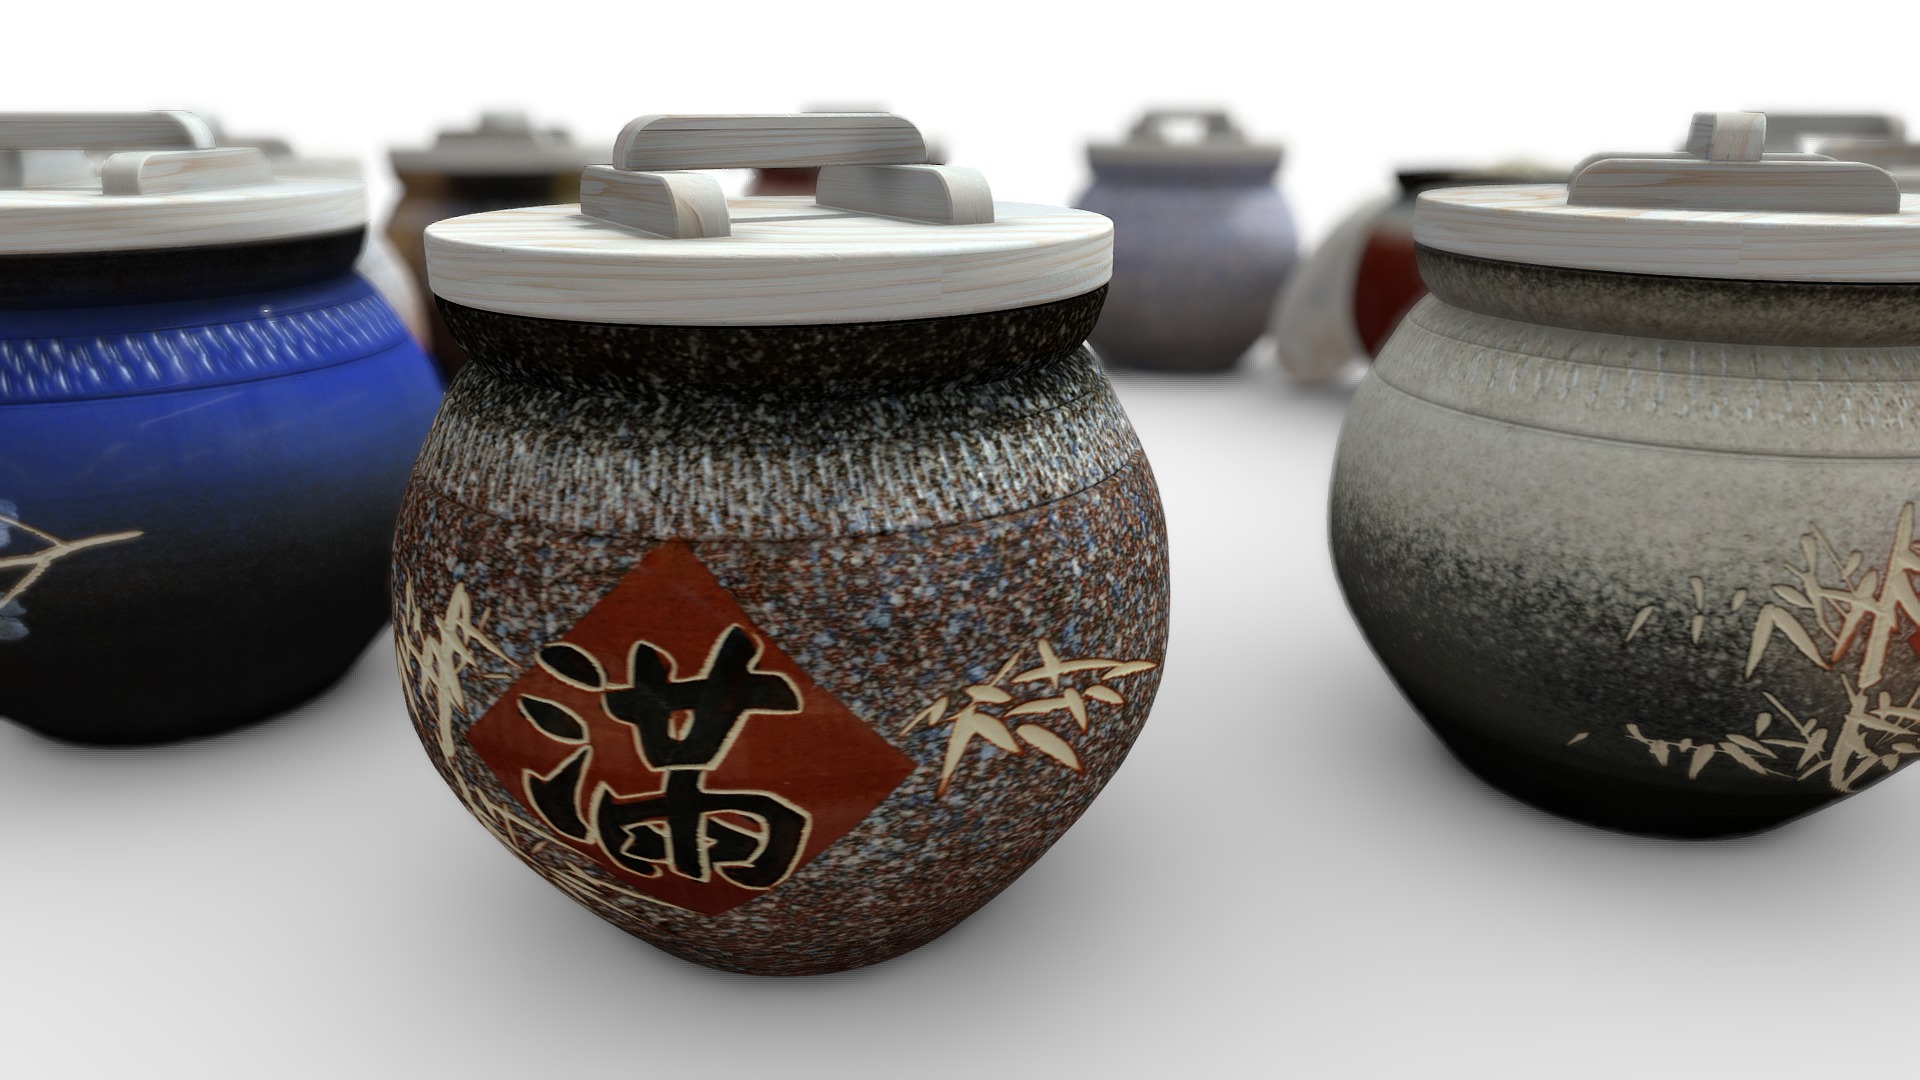 3D model 【3D模擬-上等】10斤鶯歌上等頂級米甕全系列顏色展示 - This is a 3D model of the 【3D模擬-上等】10斤鶯歌上等頂級米甕全系列顏色展示. The 3D model is about a close-up of some poker chips.